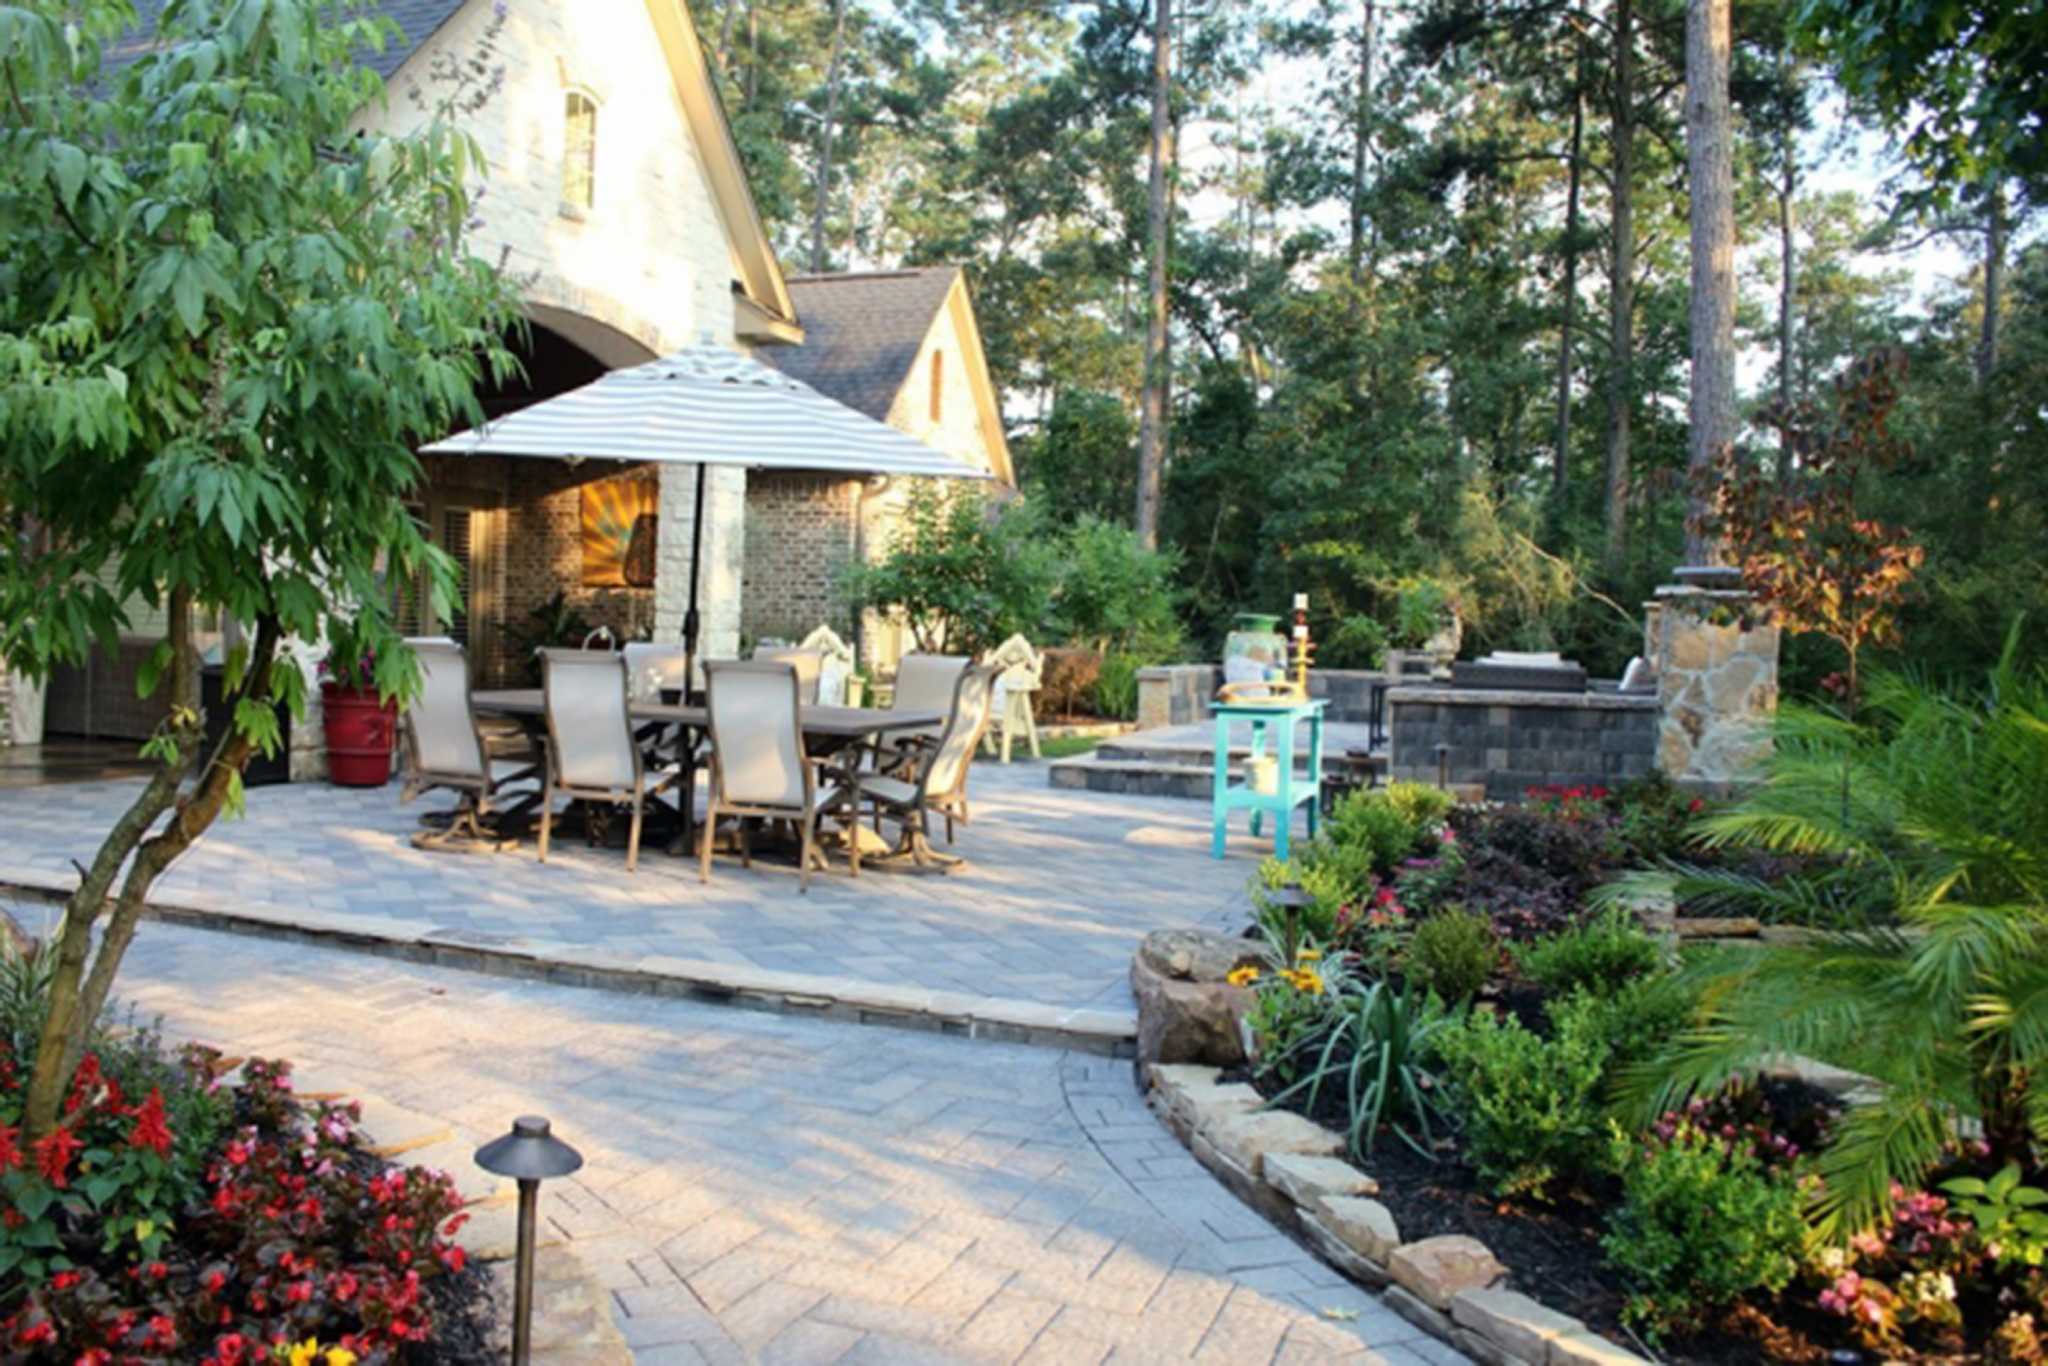 What $50, $500 or $5,000 buys in landscaping